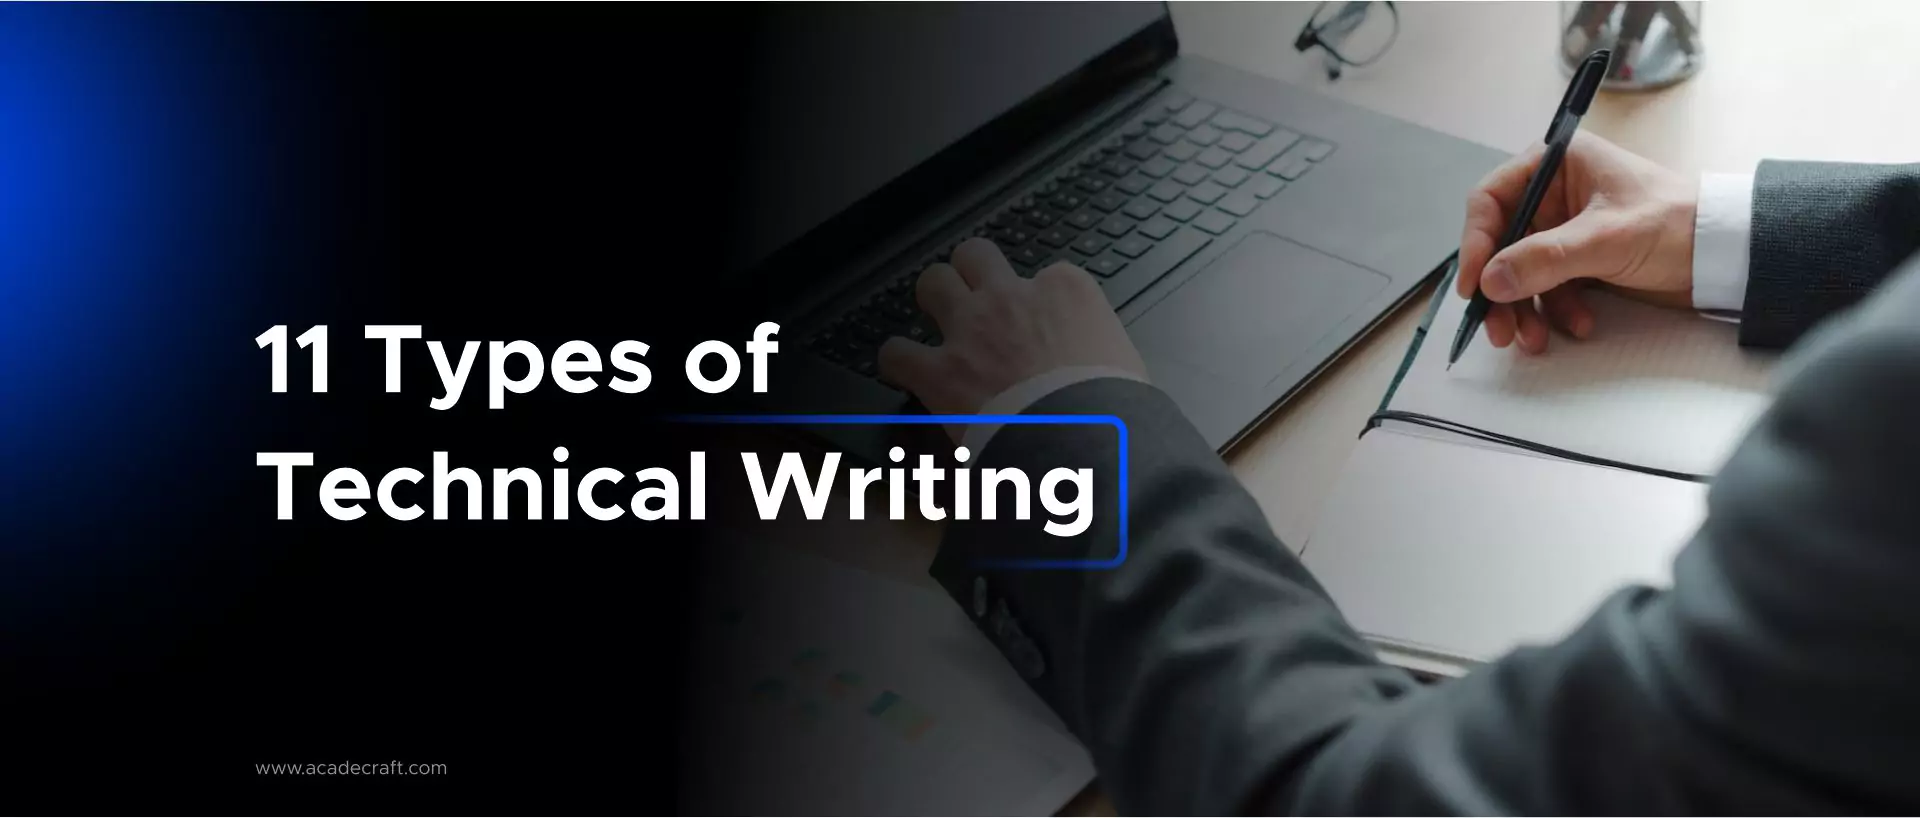 Types of Technical Writing'